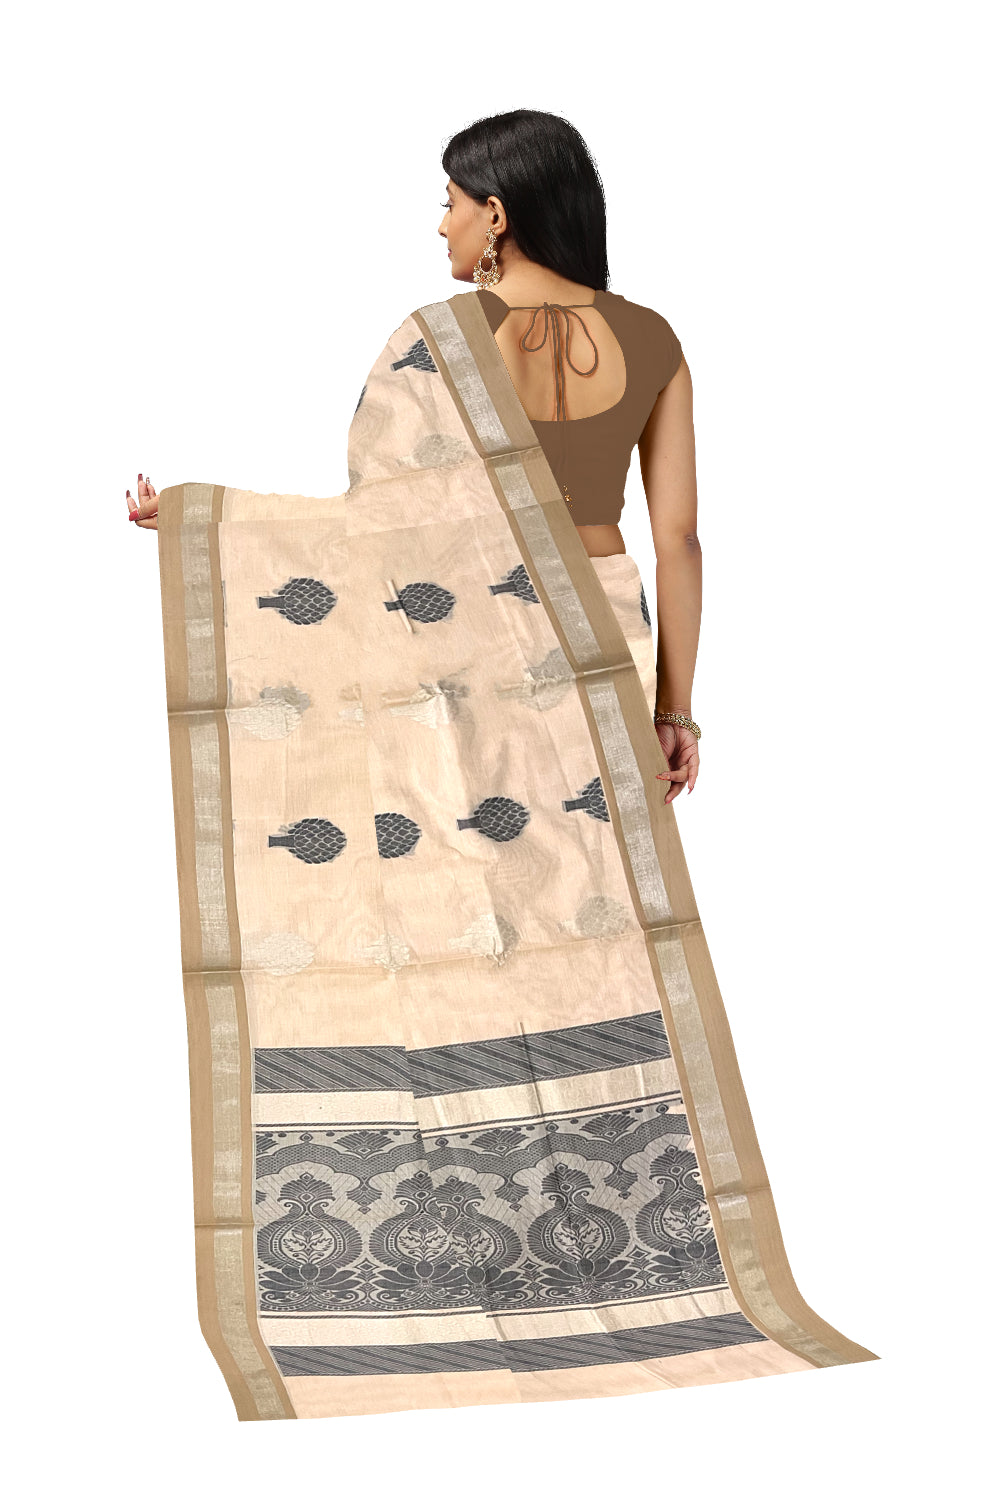 Southloom Light Brown Cotton Saree with Floral Woven Designs